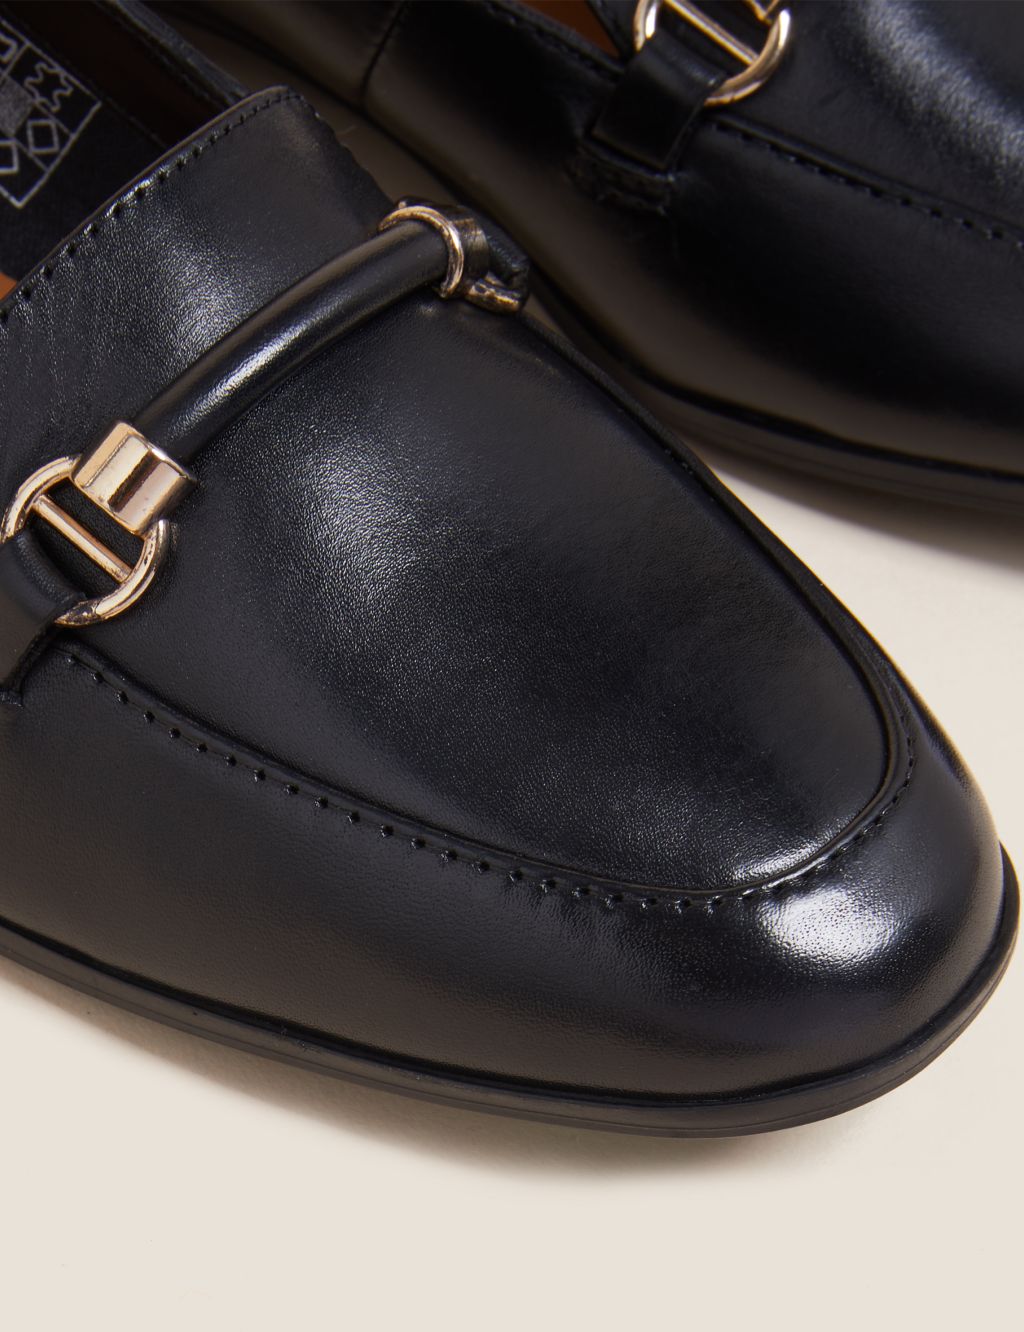 Leather Flat Loafers image 4